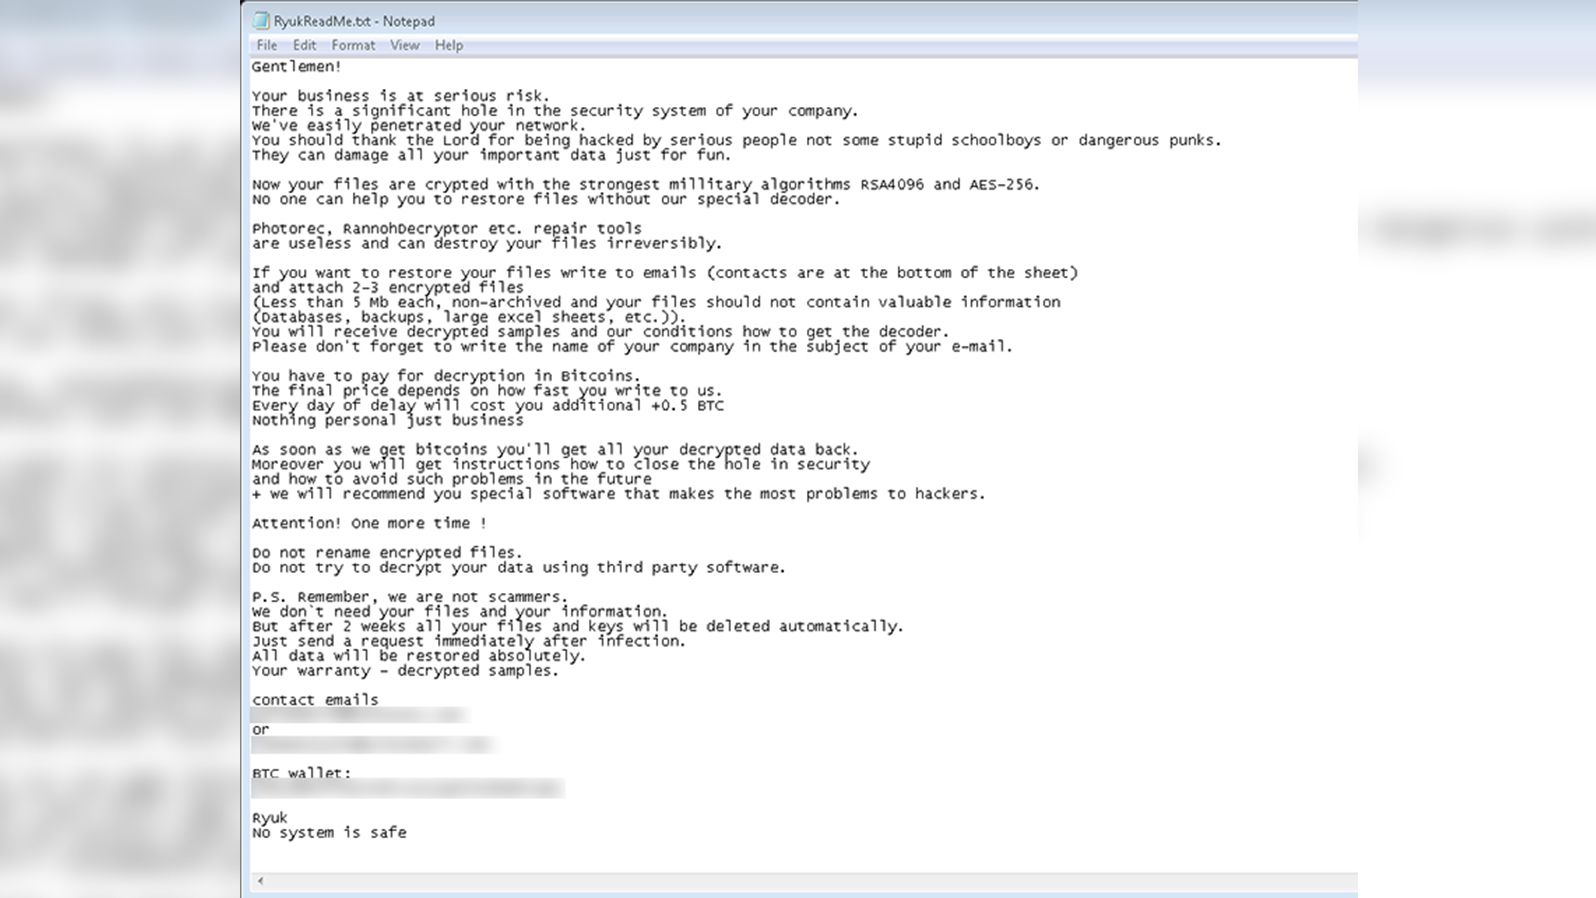 A screenshot of an example of the Ryuk ransomware, provided by Allan Liska from Recorded Future.